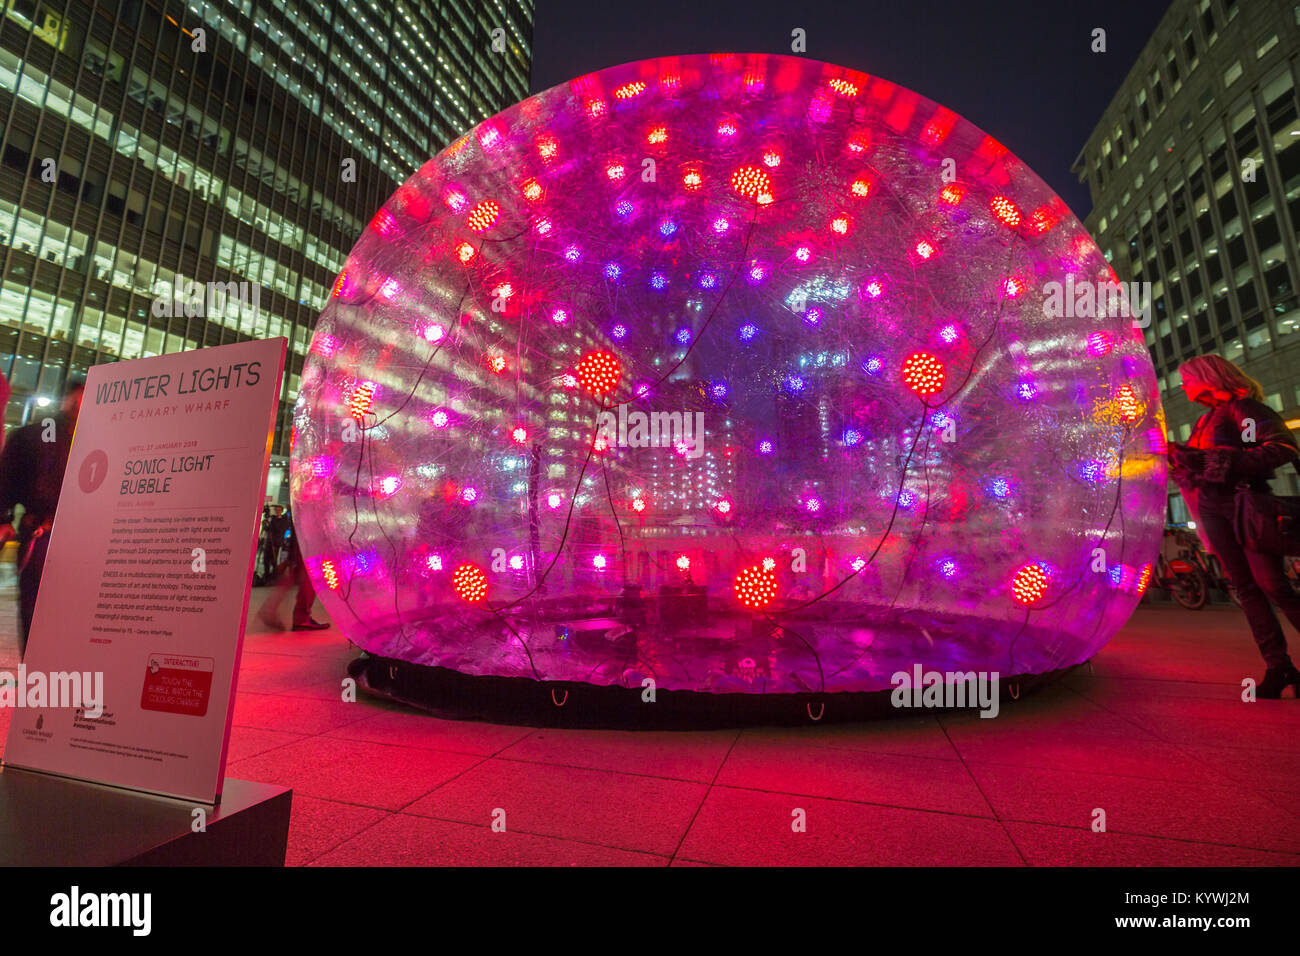 London, UK. 16th Jan, 2018. Winter Lights interactive art installations at Canary Wharf includes ‘Sonic Light Bubble' by Eness. A six-metre wide interactive bubble installation radiating light and sound when approached or touched, emitting a warm glow through 236 programmed LEDs constantly generating new visual patterns to a unique soundtrack. Credit: Guy Corbishley/Alamy Live News Stock Photo